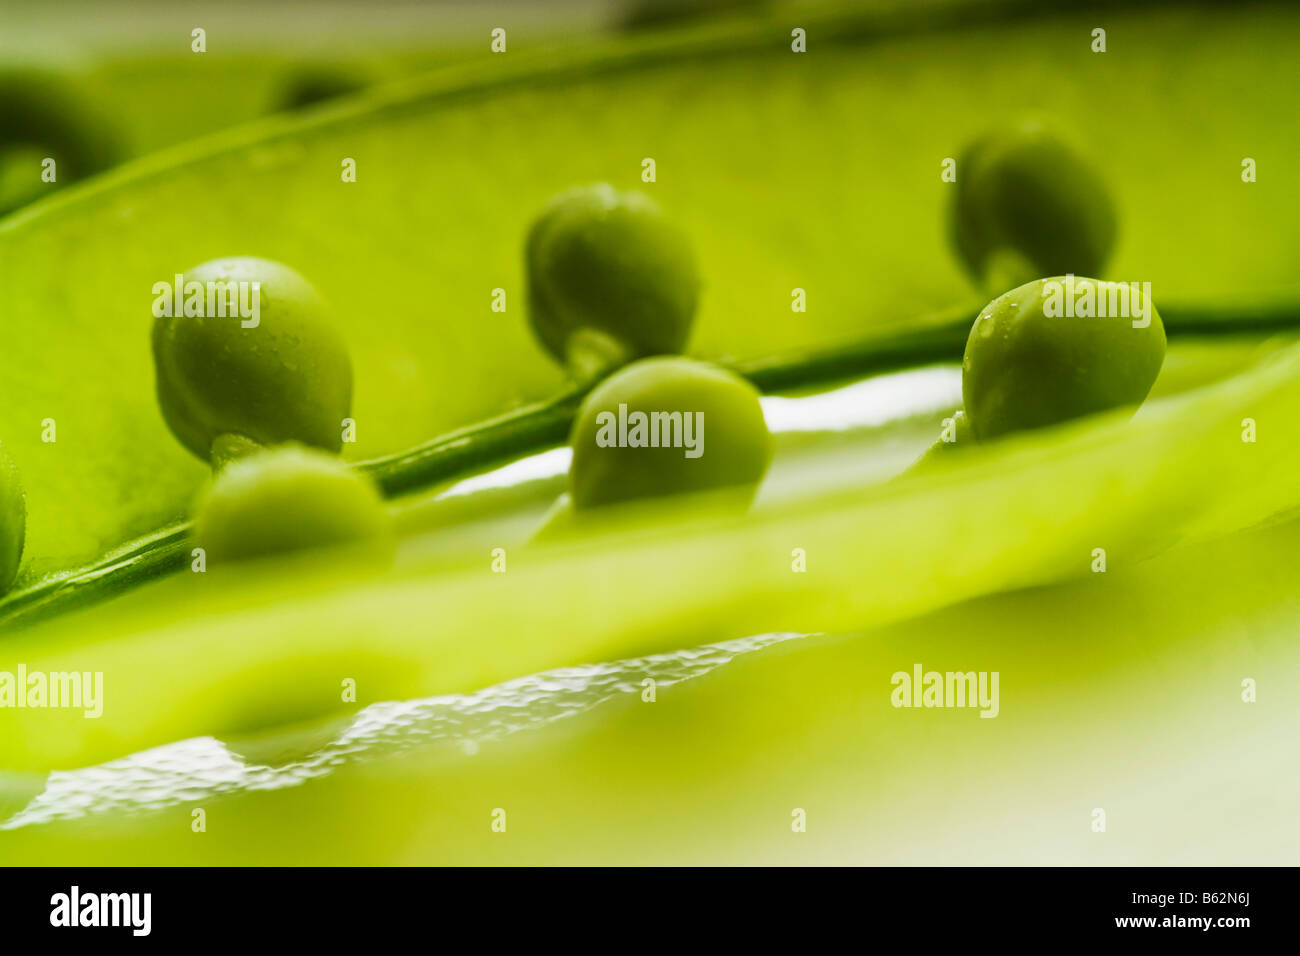 Close-up of pea pods Stock Photo